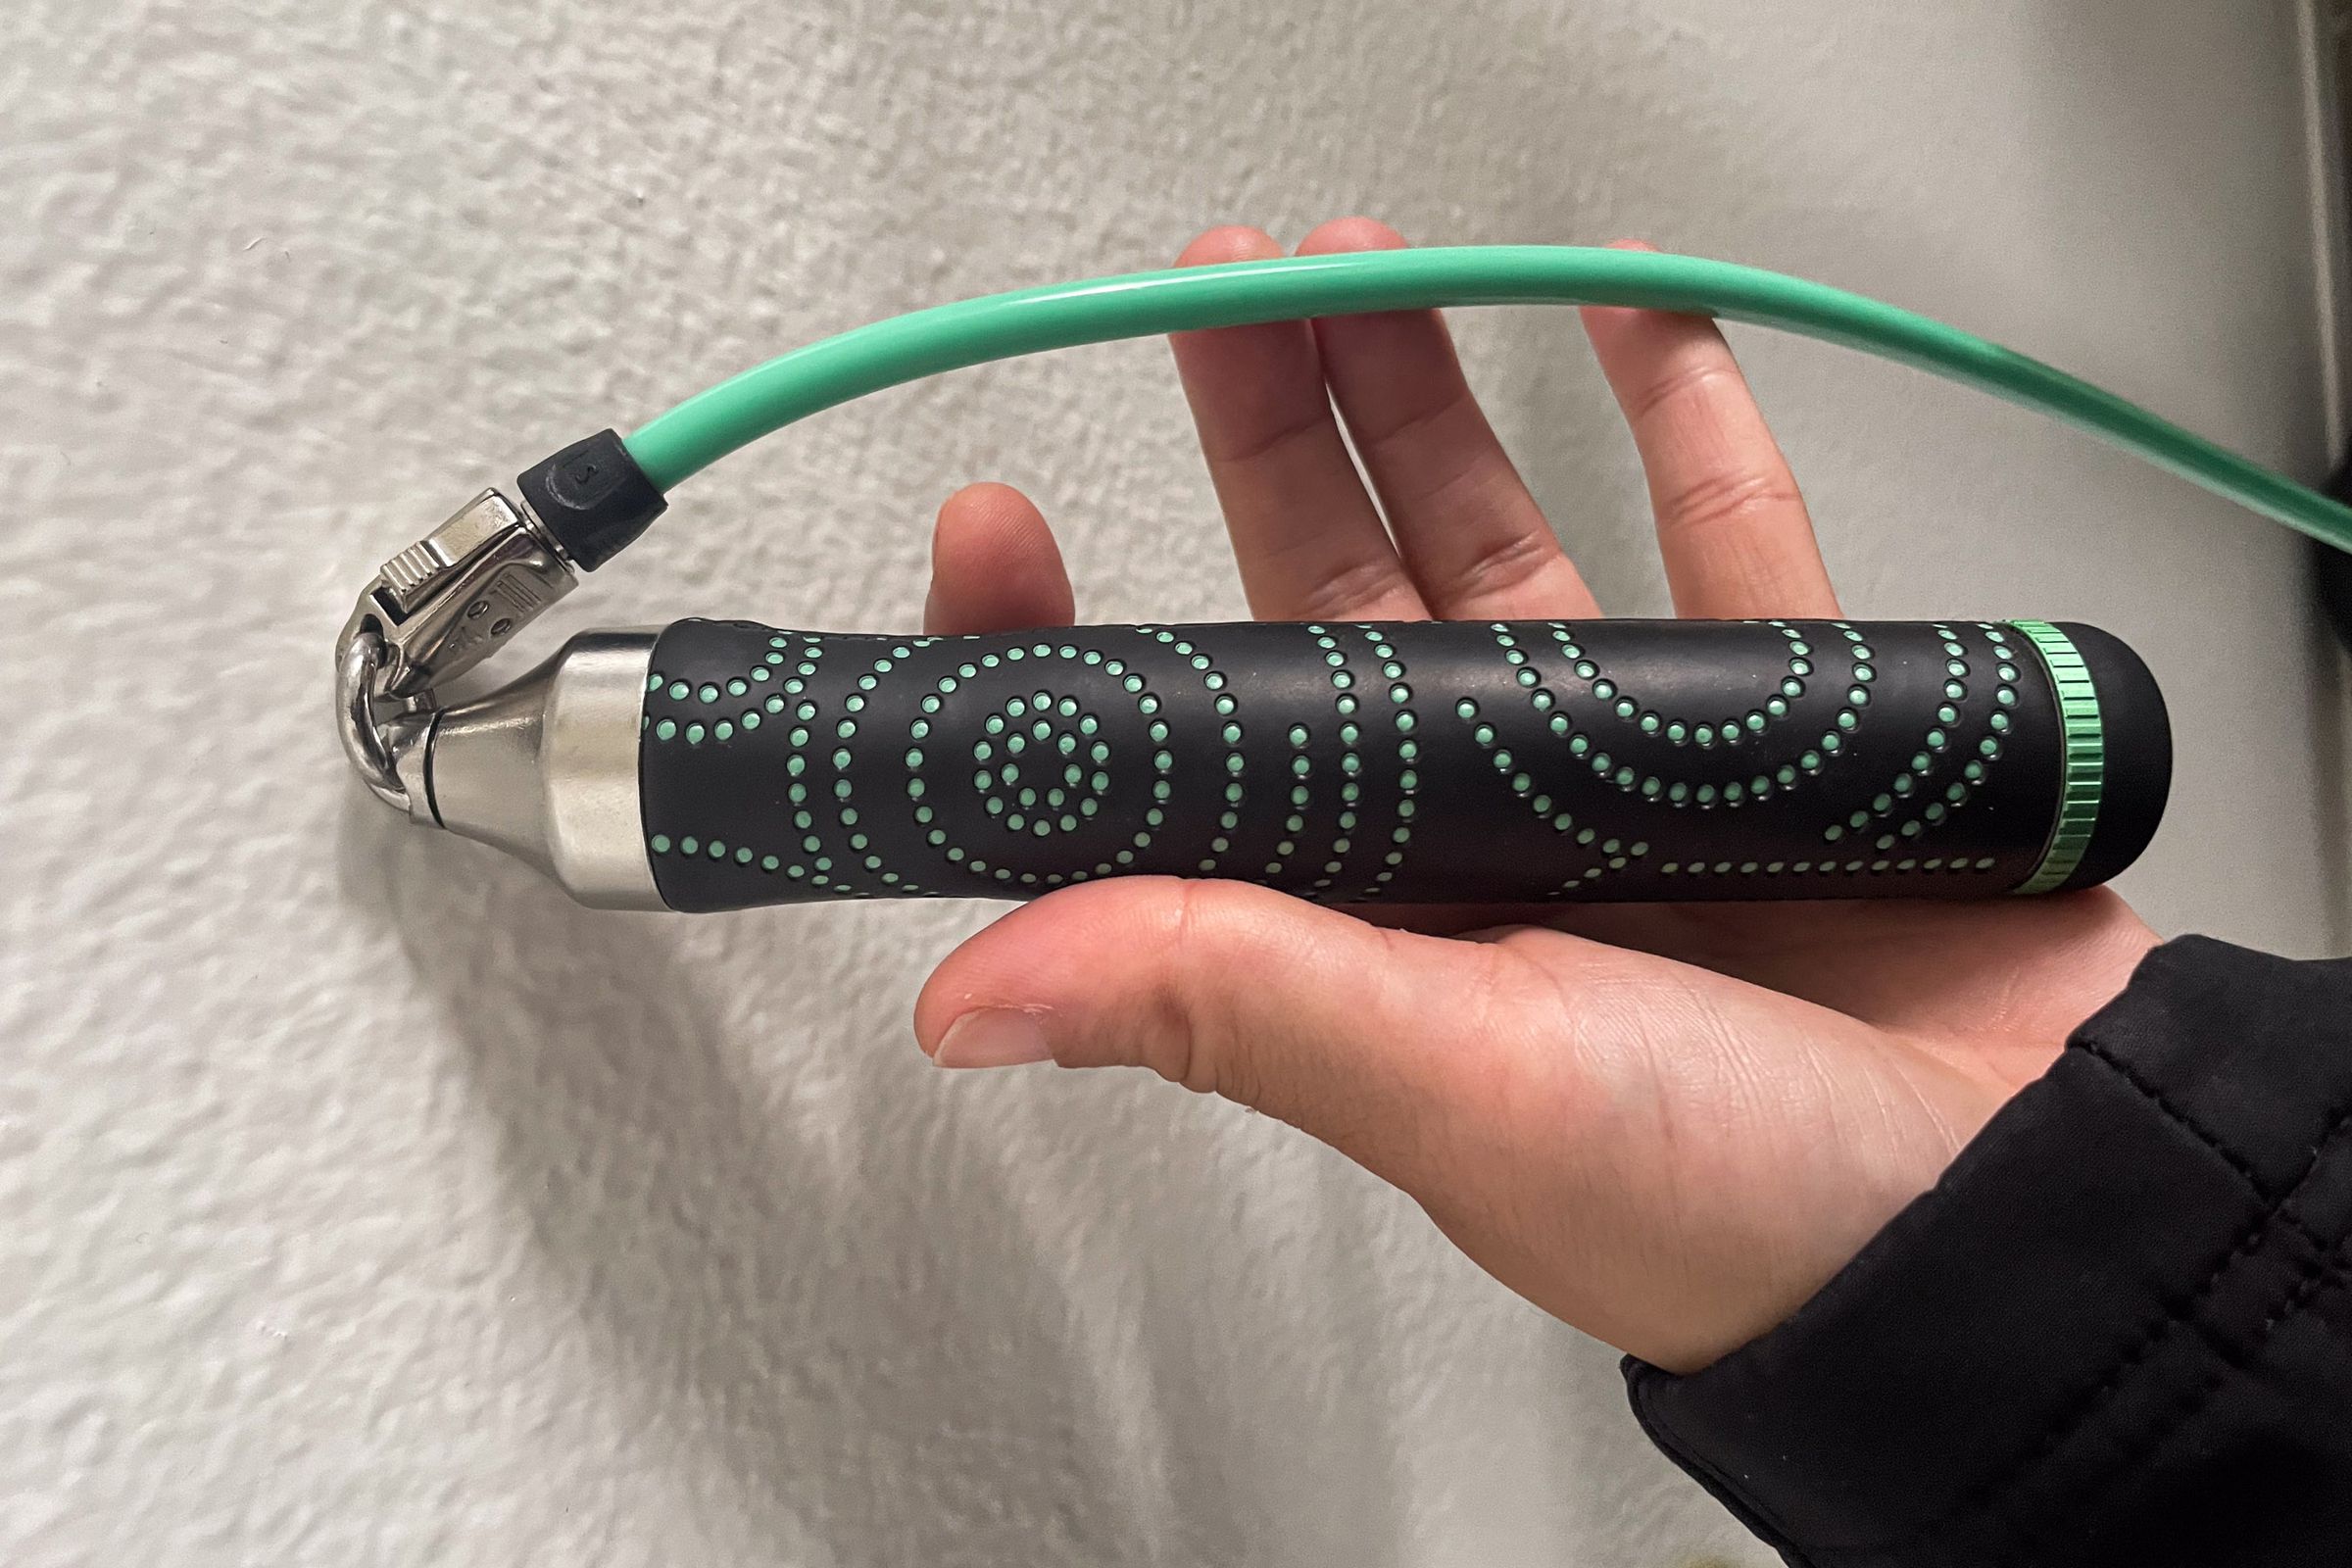 A hand holding a set of black jump-rope handles with green squiggly lines, steel interconnects, and a green rope connecting them.